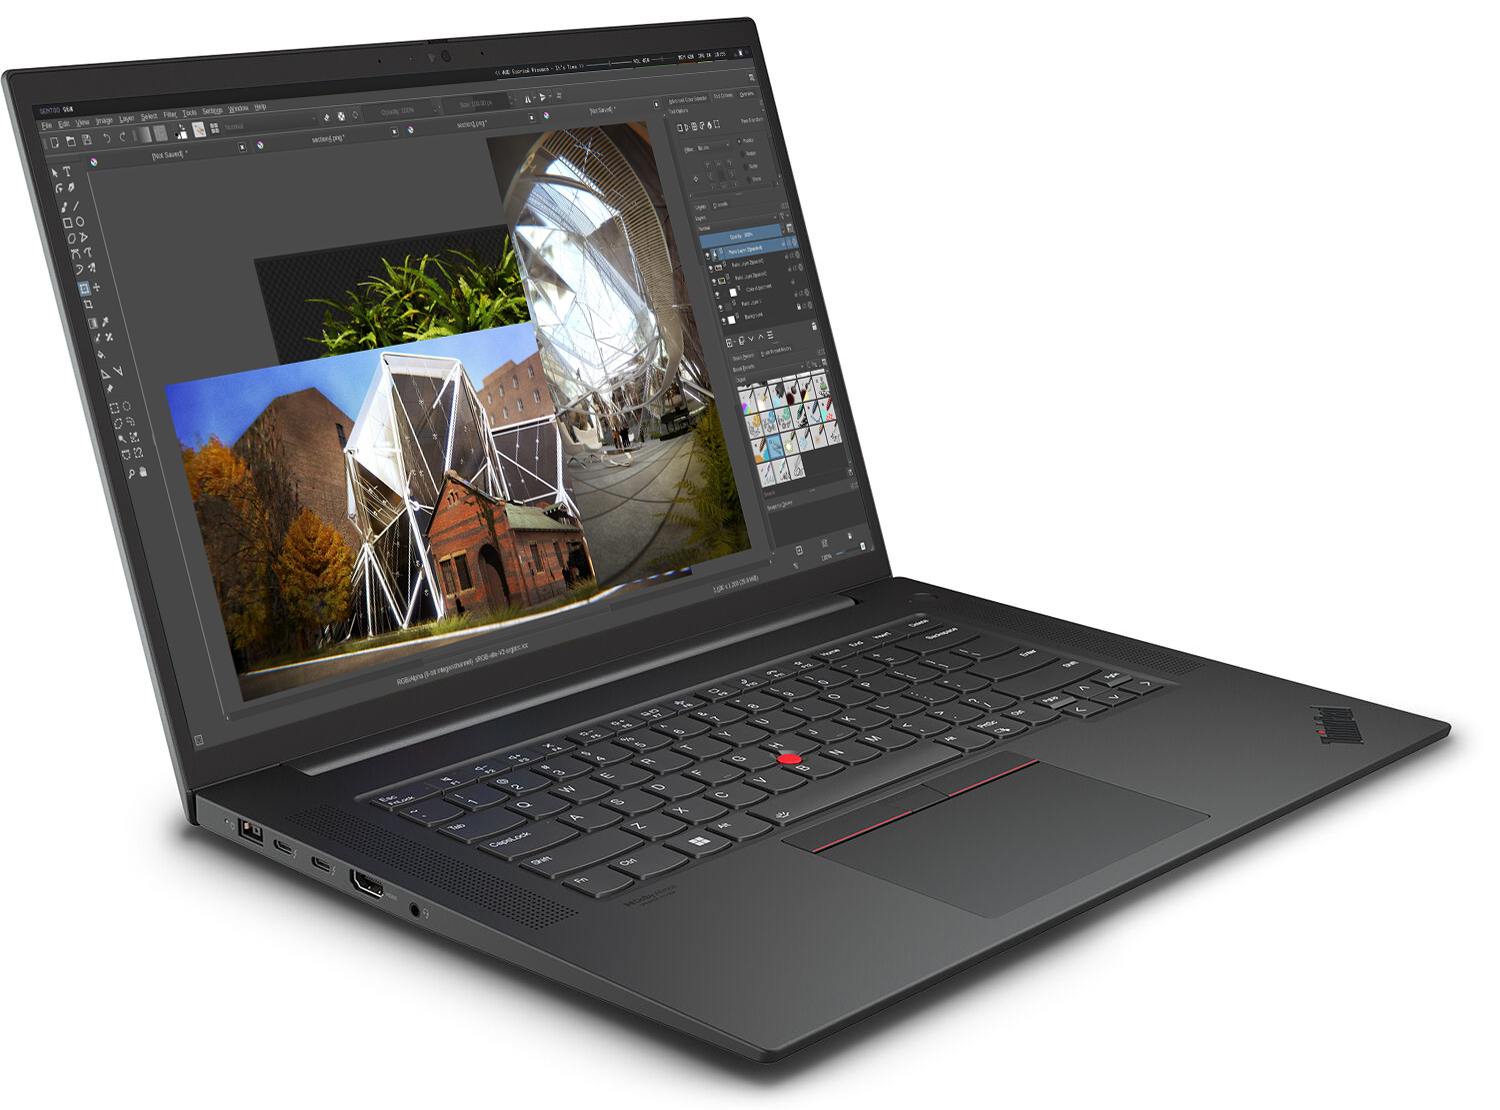 Lenovo ThinkPad remains the ultimate reliable laptop